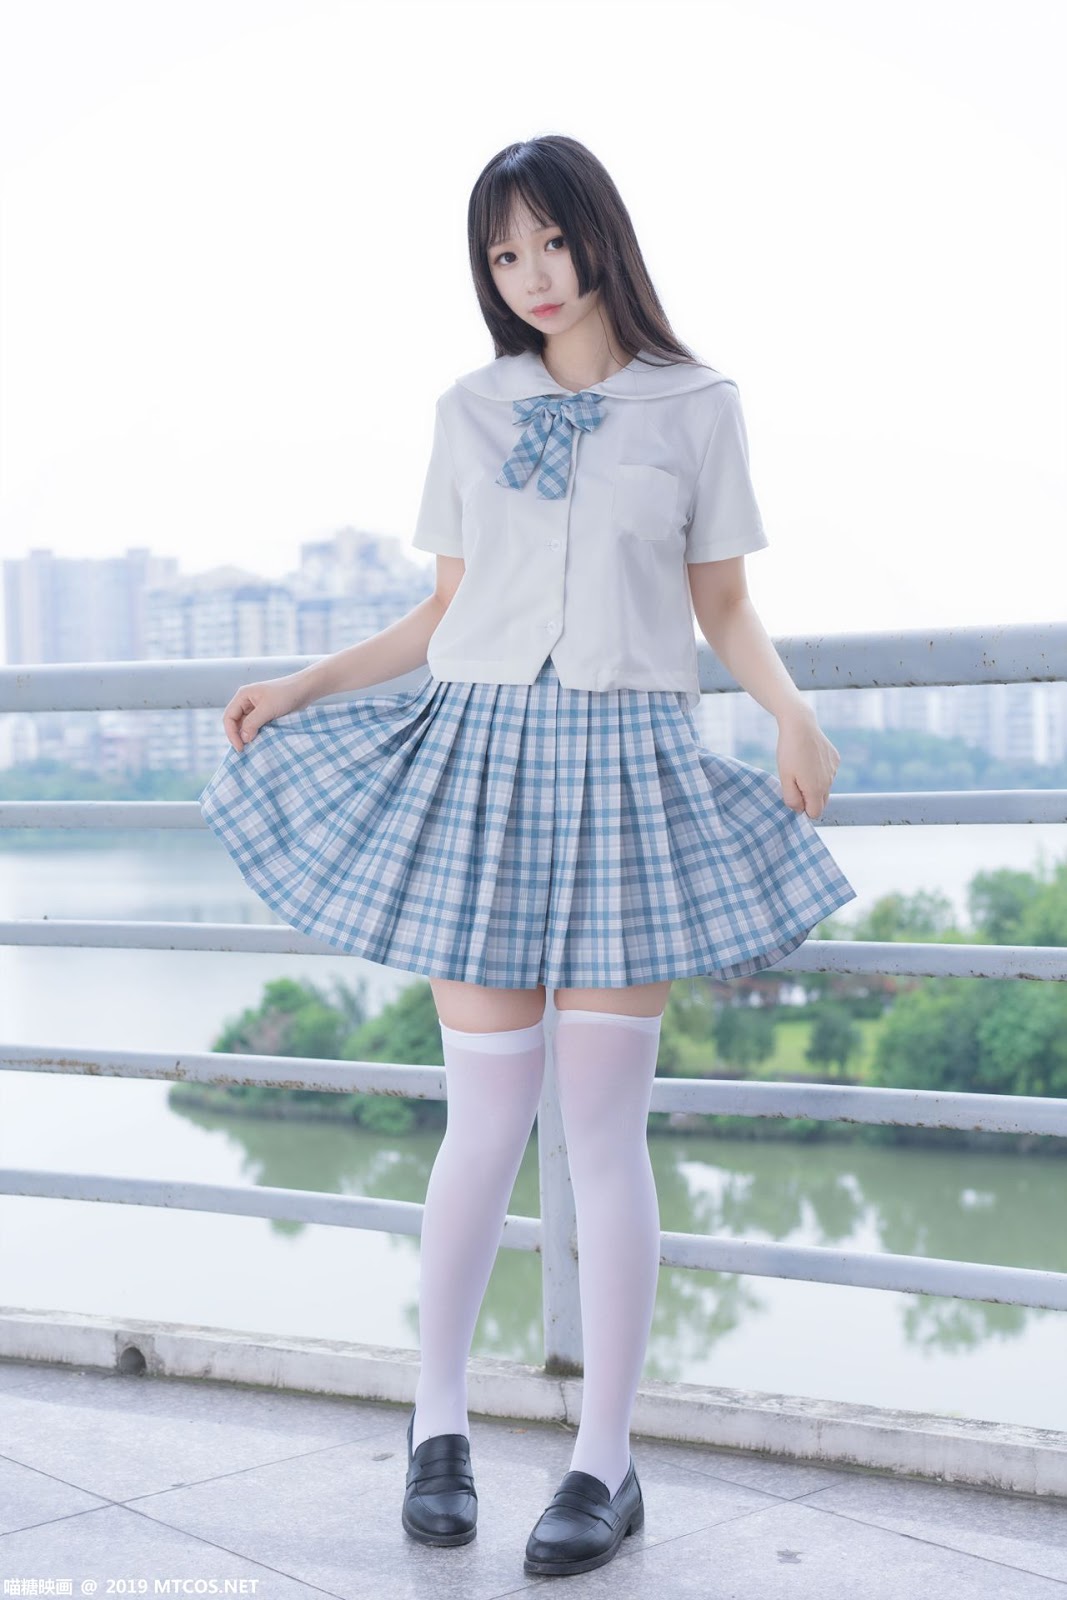 Image [MTCos] 喵糖映画 Vol.015 – Chinese Cute Model - White Shirt and Plaid Skirt - TruePic.net- Picture-16